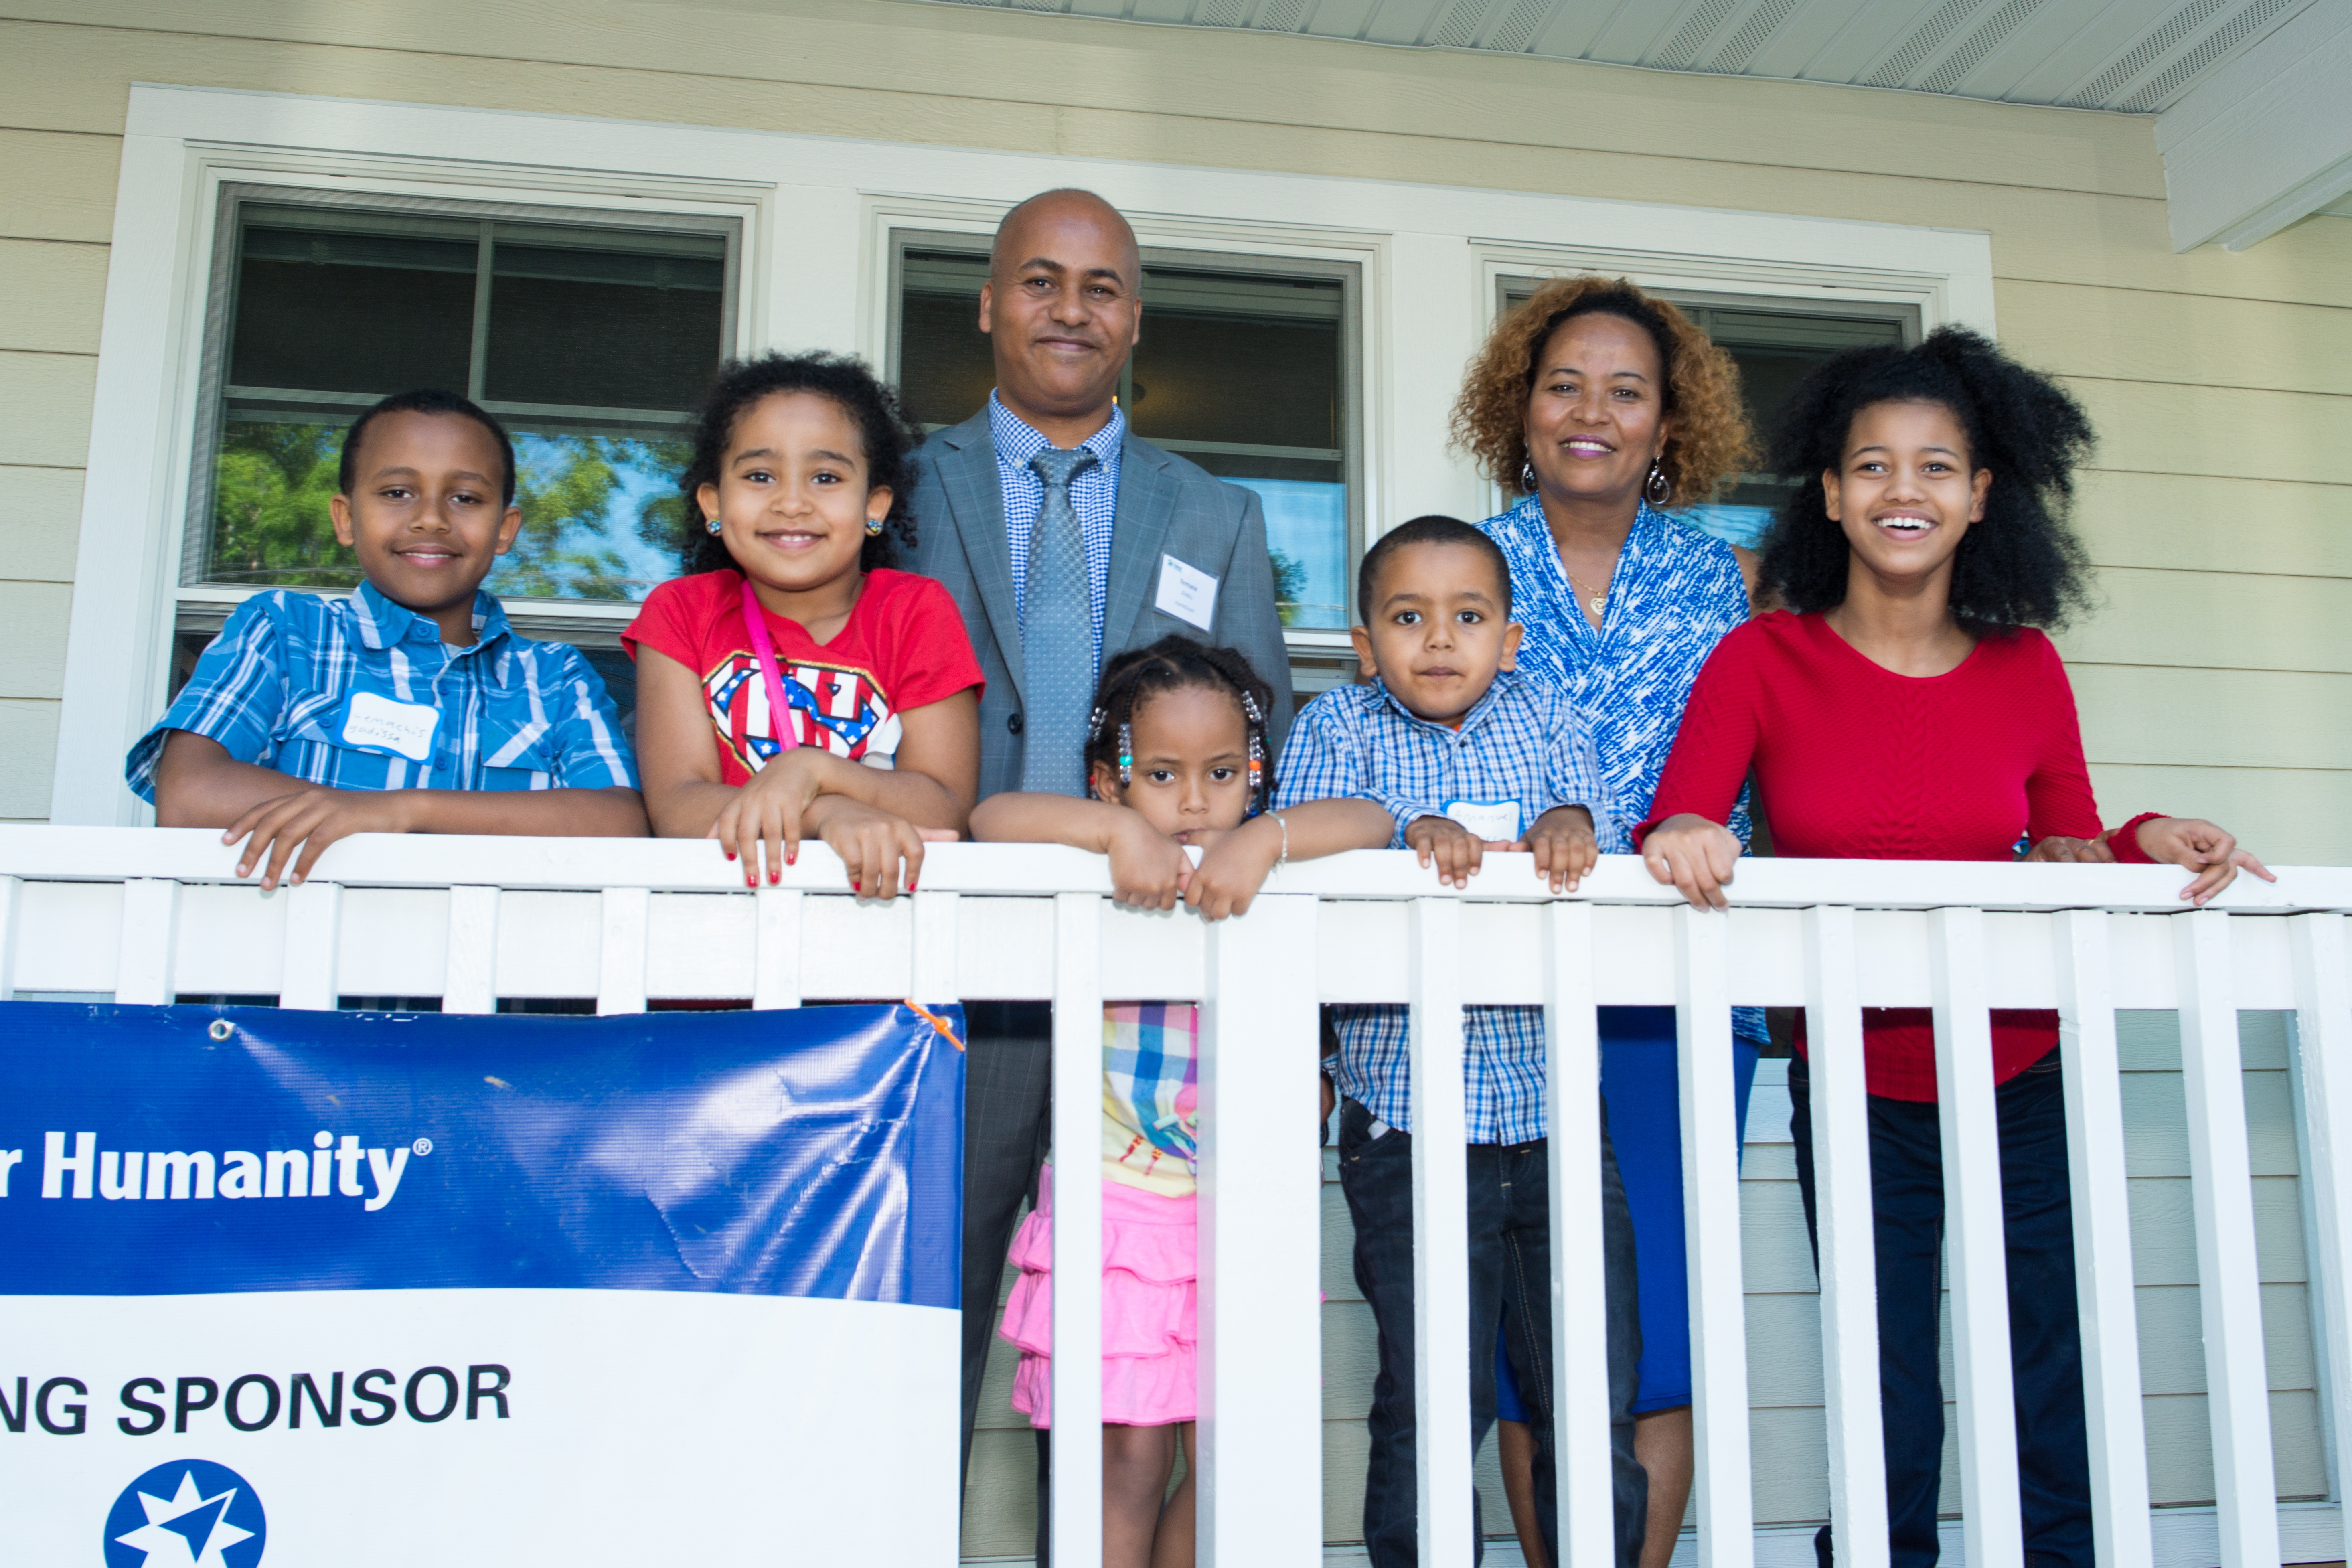 Two Families Reflect On Faith At Their Home Dedication